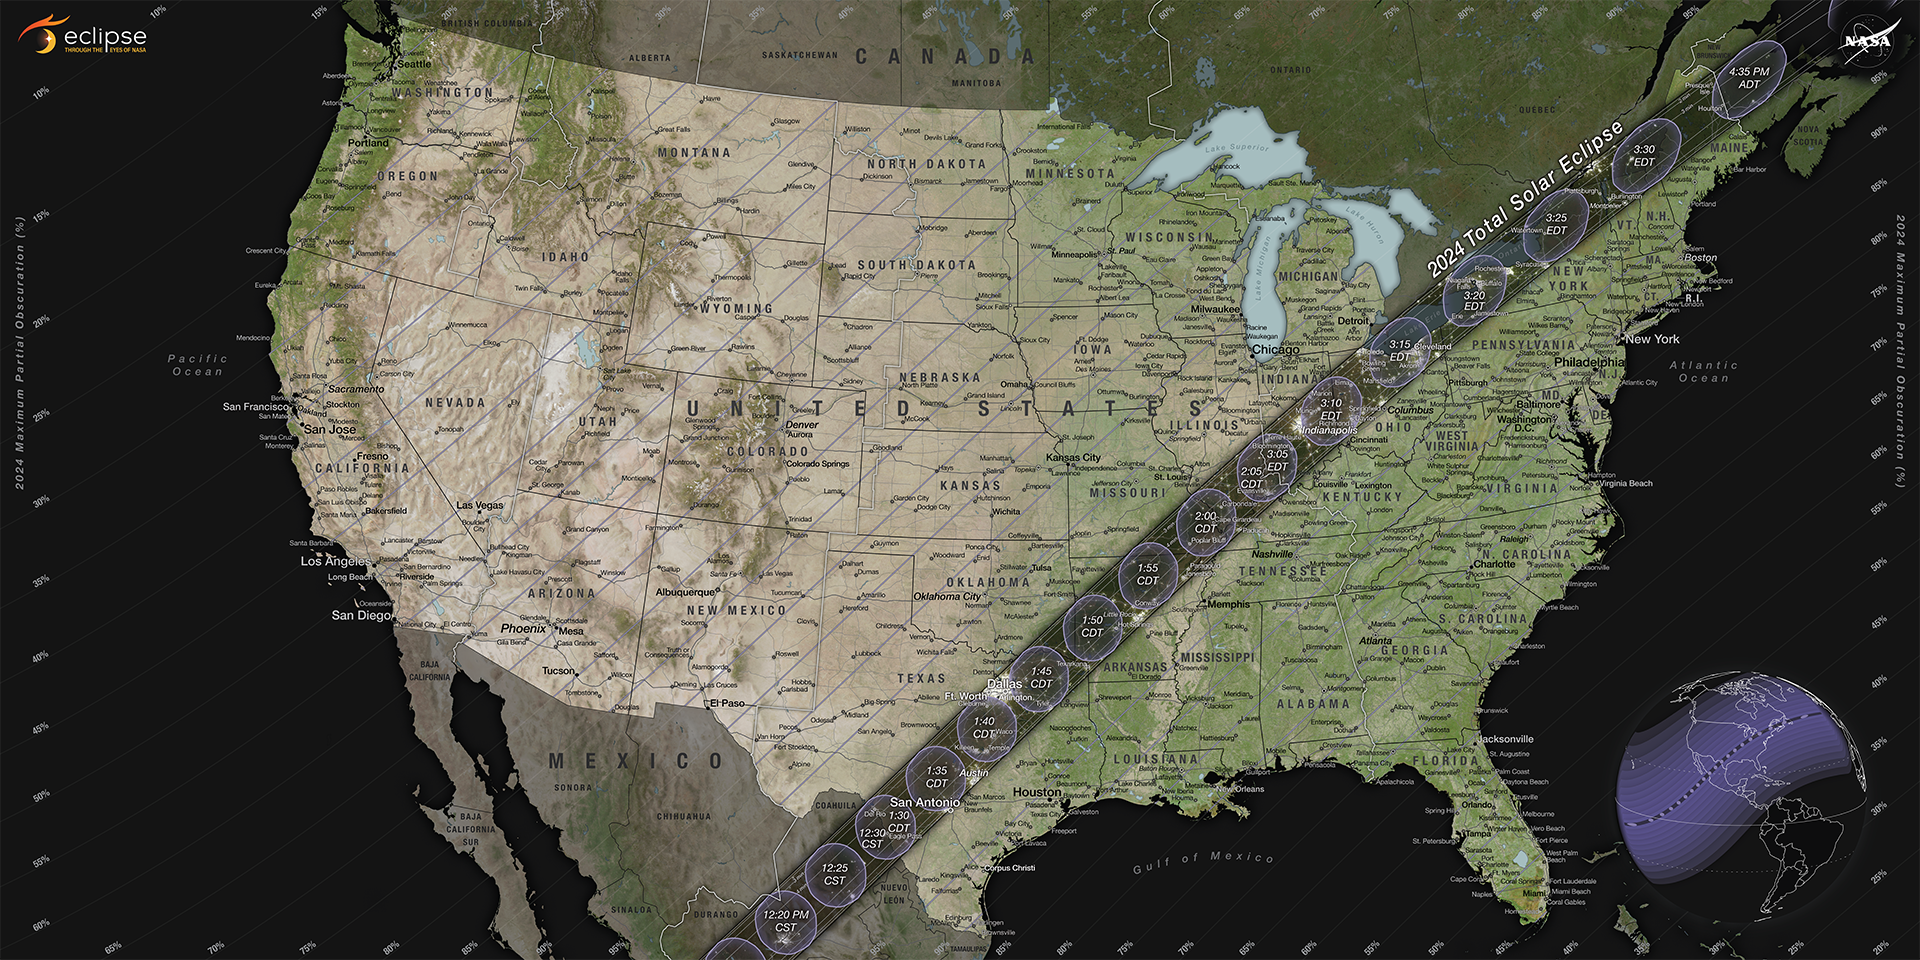 NASA Map of the April 8 eclipse.